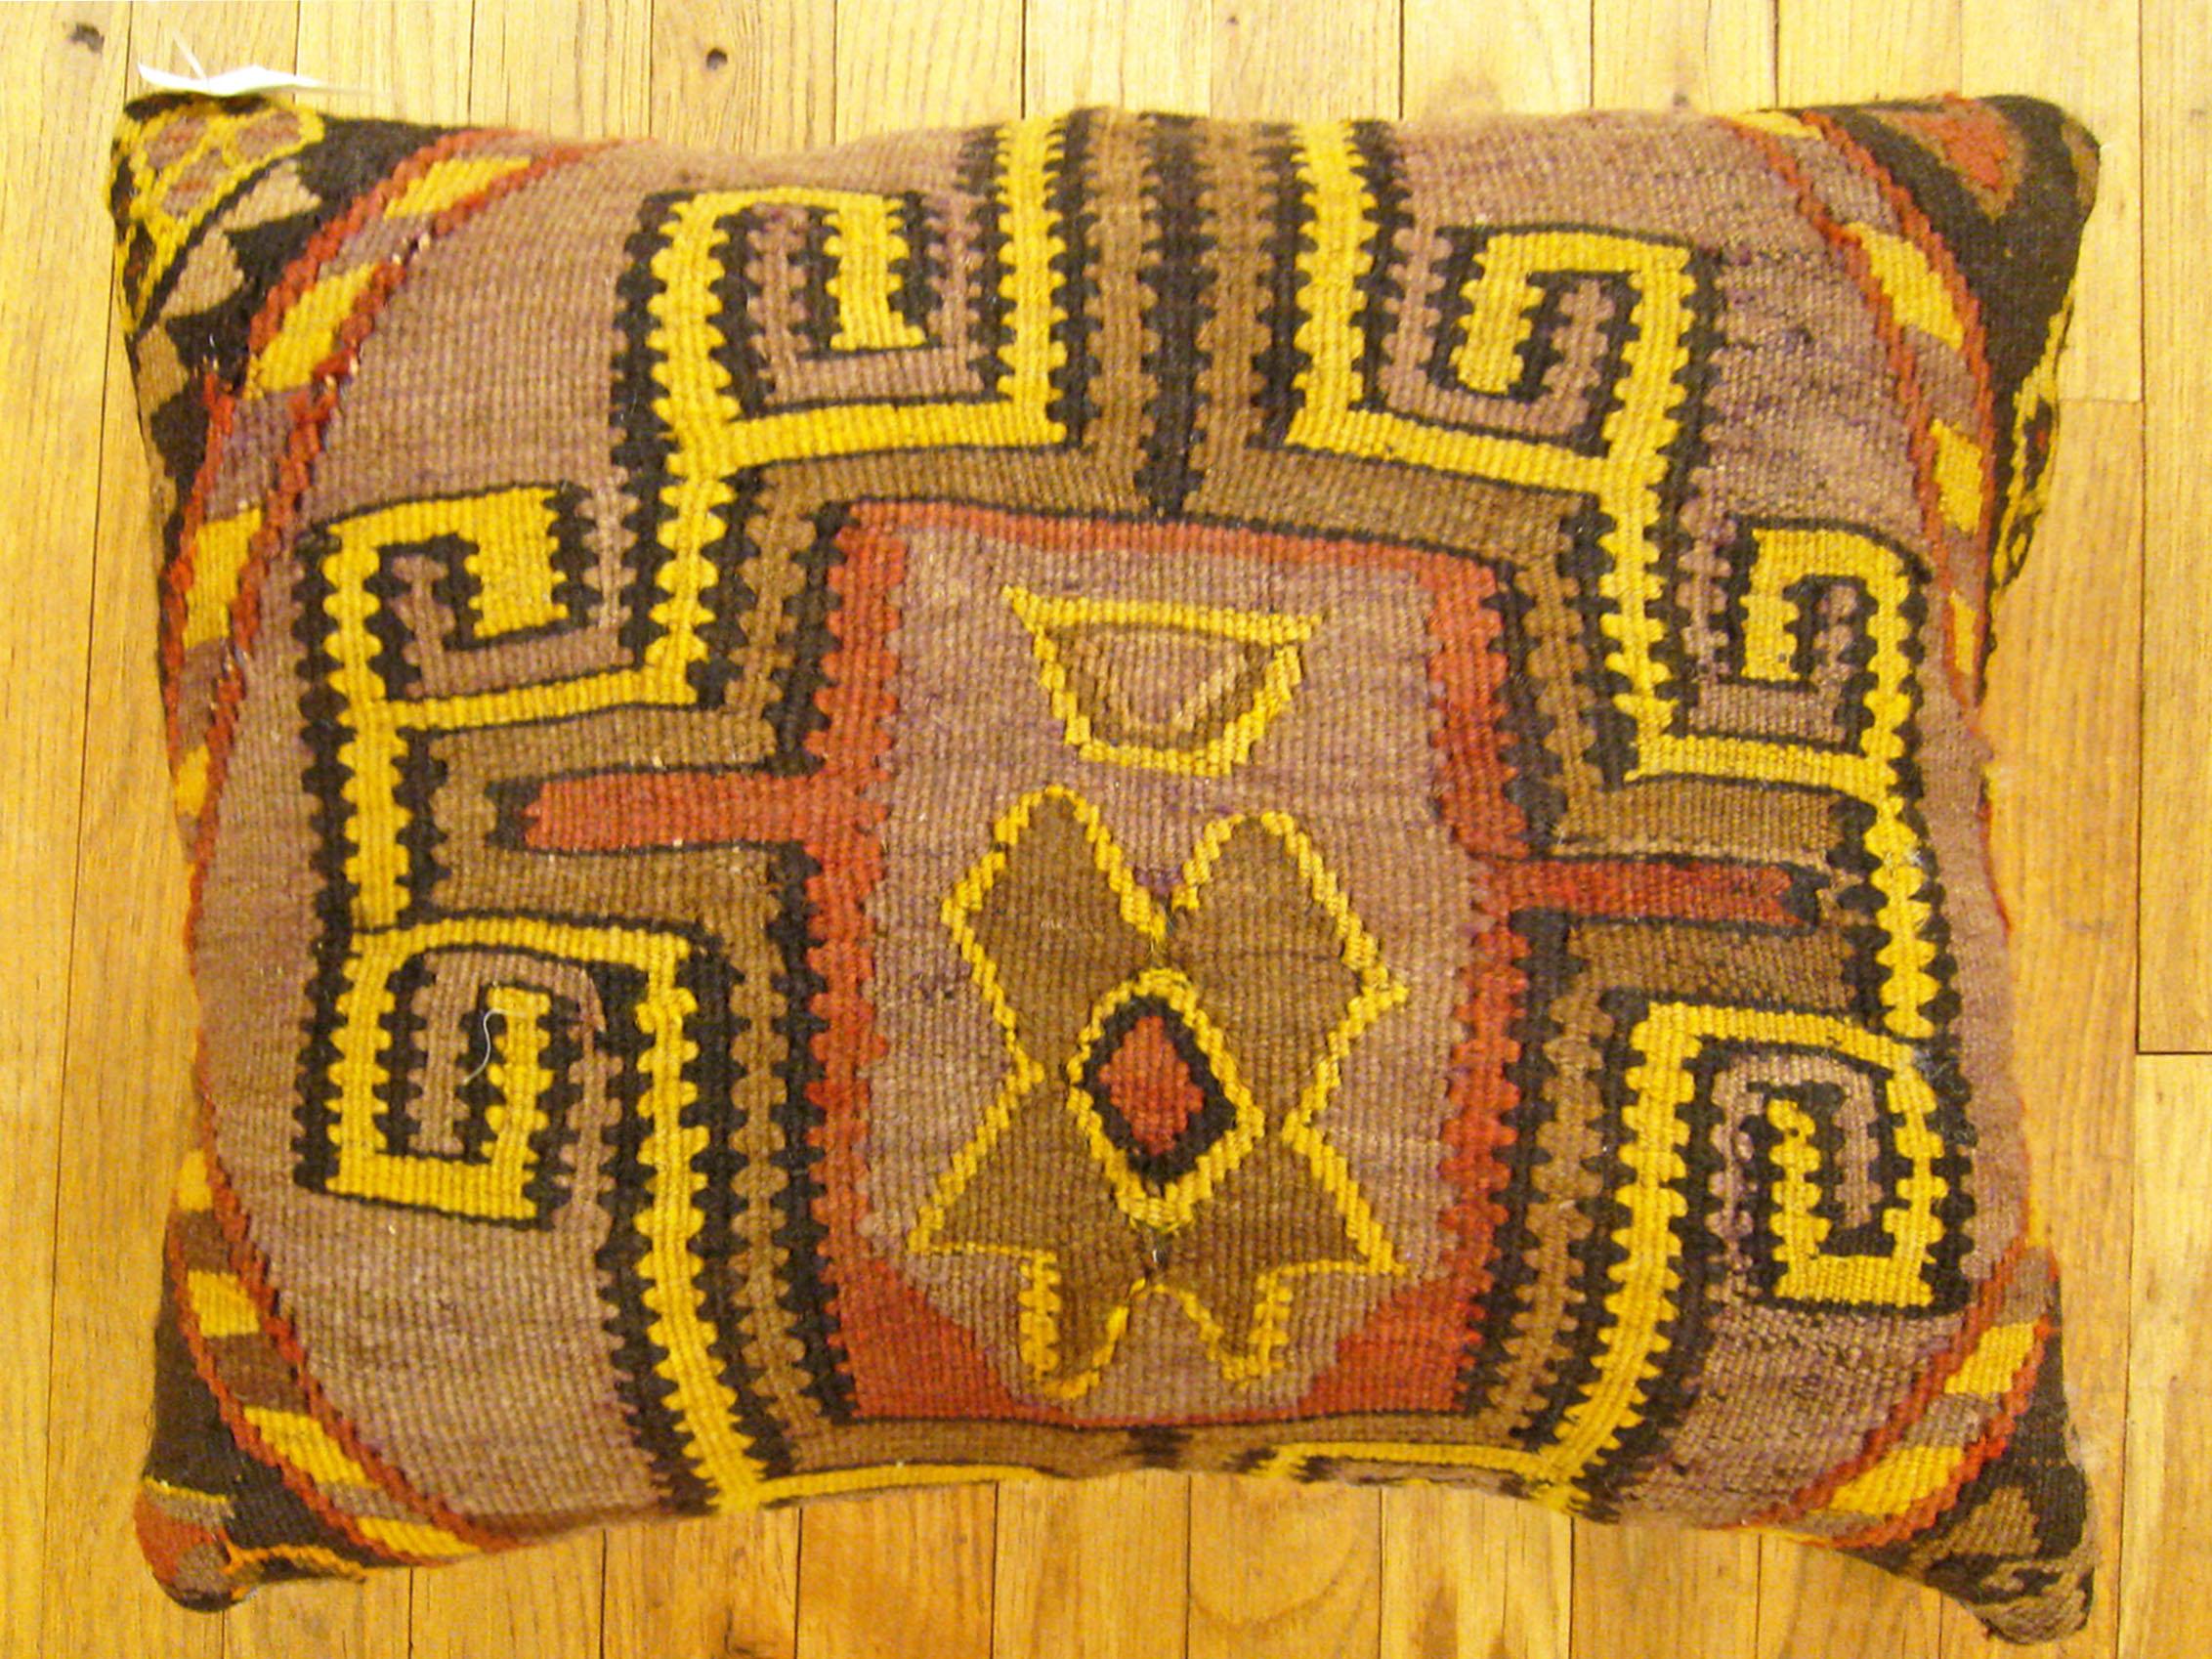 Vintage Turkish Kilim rug pillow; size 22” x 18”.

A vintage decorative pillow with geometric abstracts allover a brown central field, size 22” x 18”. This lovely decorative pillow features a vintage fabric of a KIilim carpet on front which is